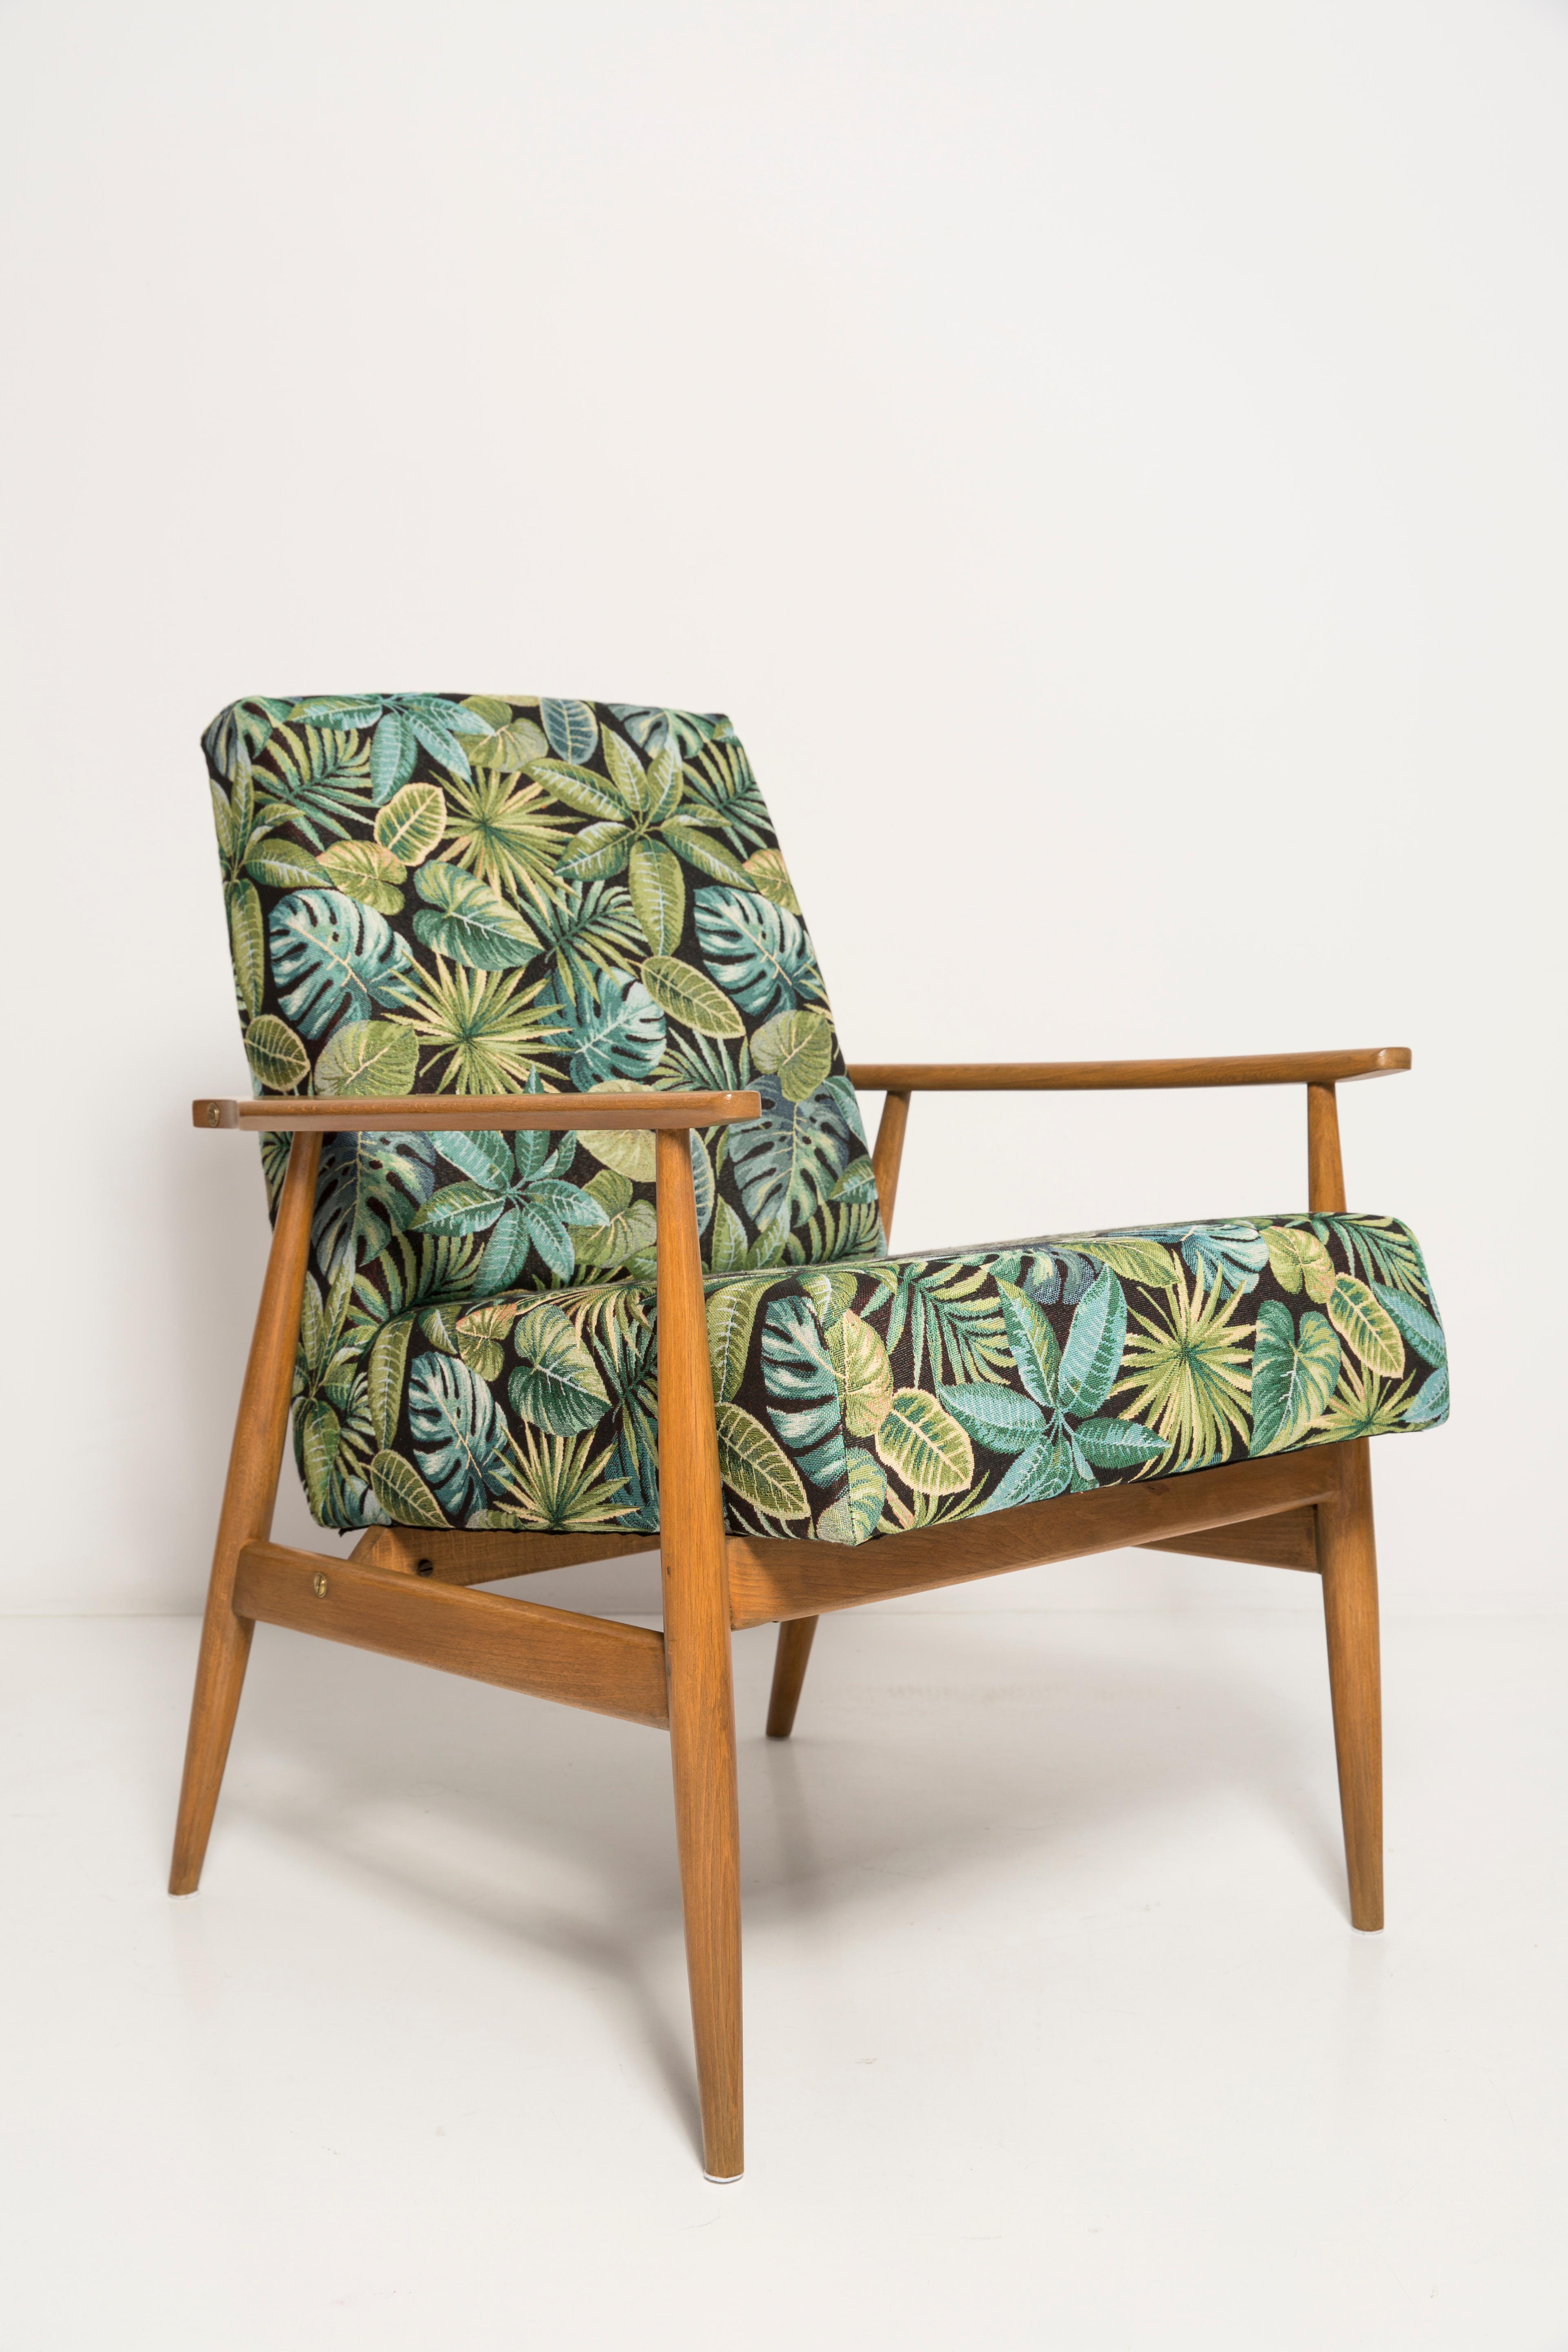 20th Century Pair of Mid-Century Green Leaves Jacquard Dante Armchairs, H. Lis, 1960s For Sale